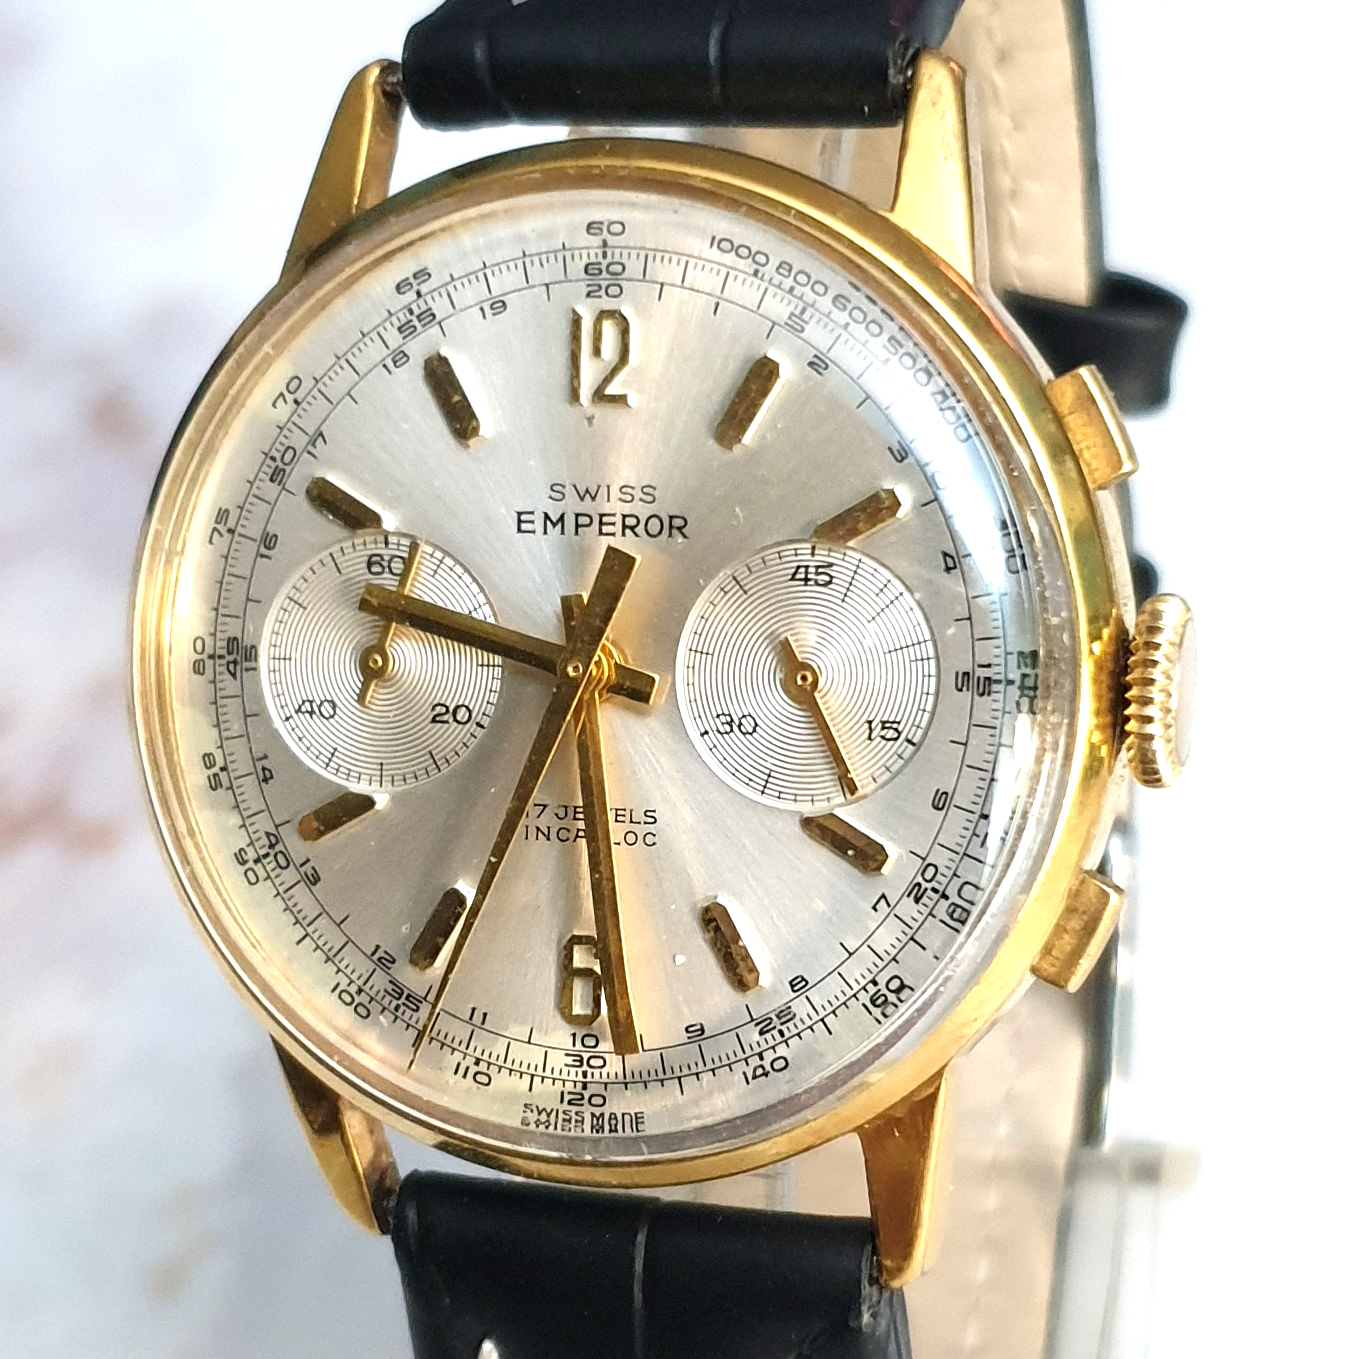 SWISS EMPEROR LARGE CHRONOGRAPH WITH ORIGINAL DIAL IN GOLD PLATED CASE VALJOUX CAL 7733 CIRCA 1960S. - Image 2 of 11